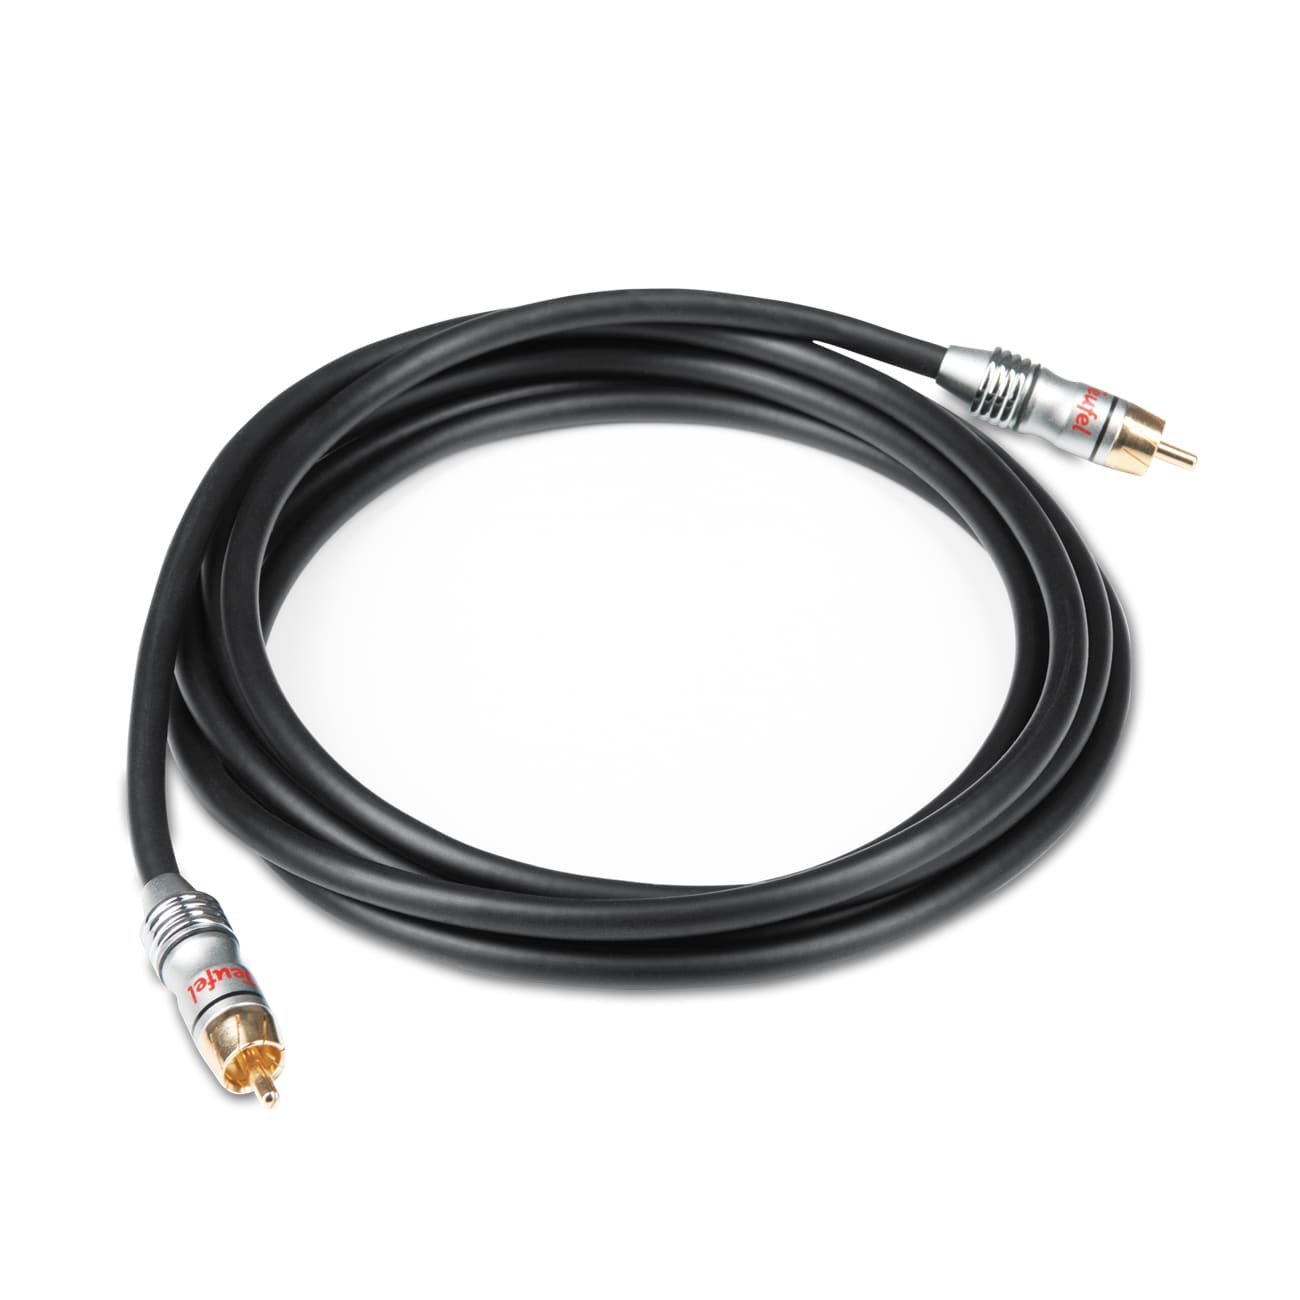 Abe filthy fax Subwoofer-Cable 2.5m - C3525W | Teufel